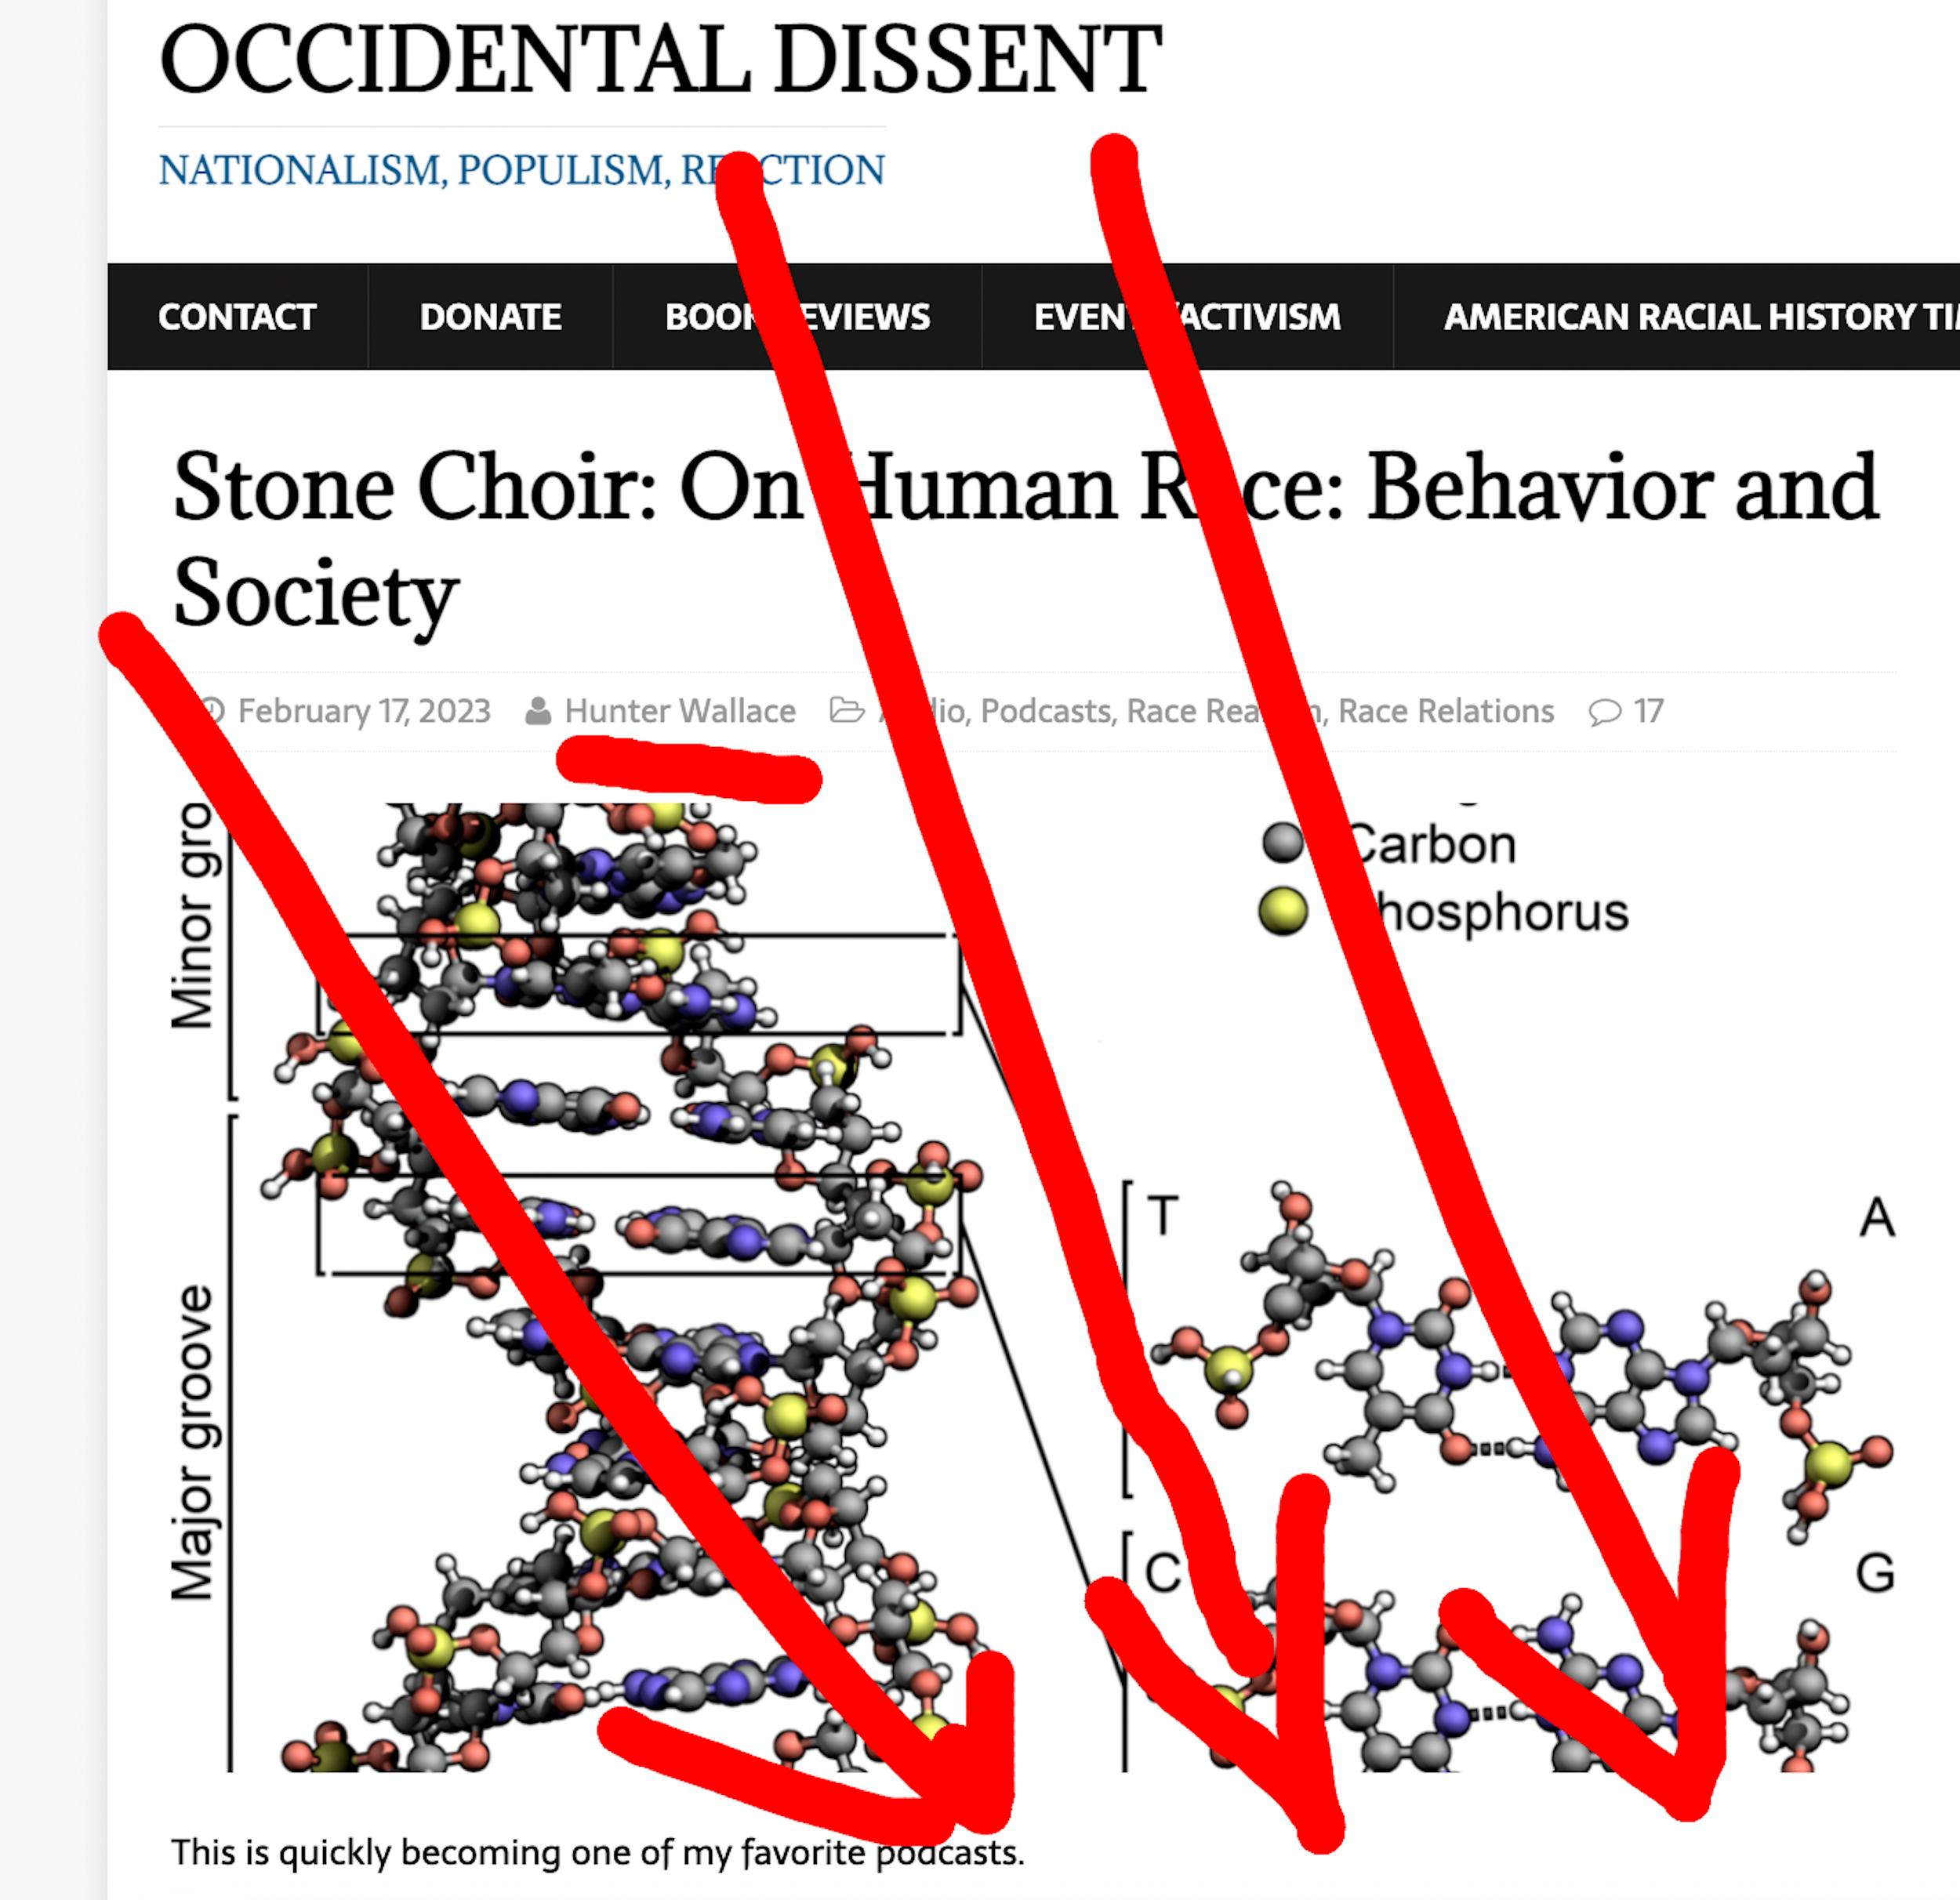 Occidental Dissent page, on which "Hunter Wallace" (Bradley Dean Griffin) promotes the Stone Choir "on Human Race" ep and says "This is becoming one of my favorite podcasts."